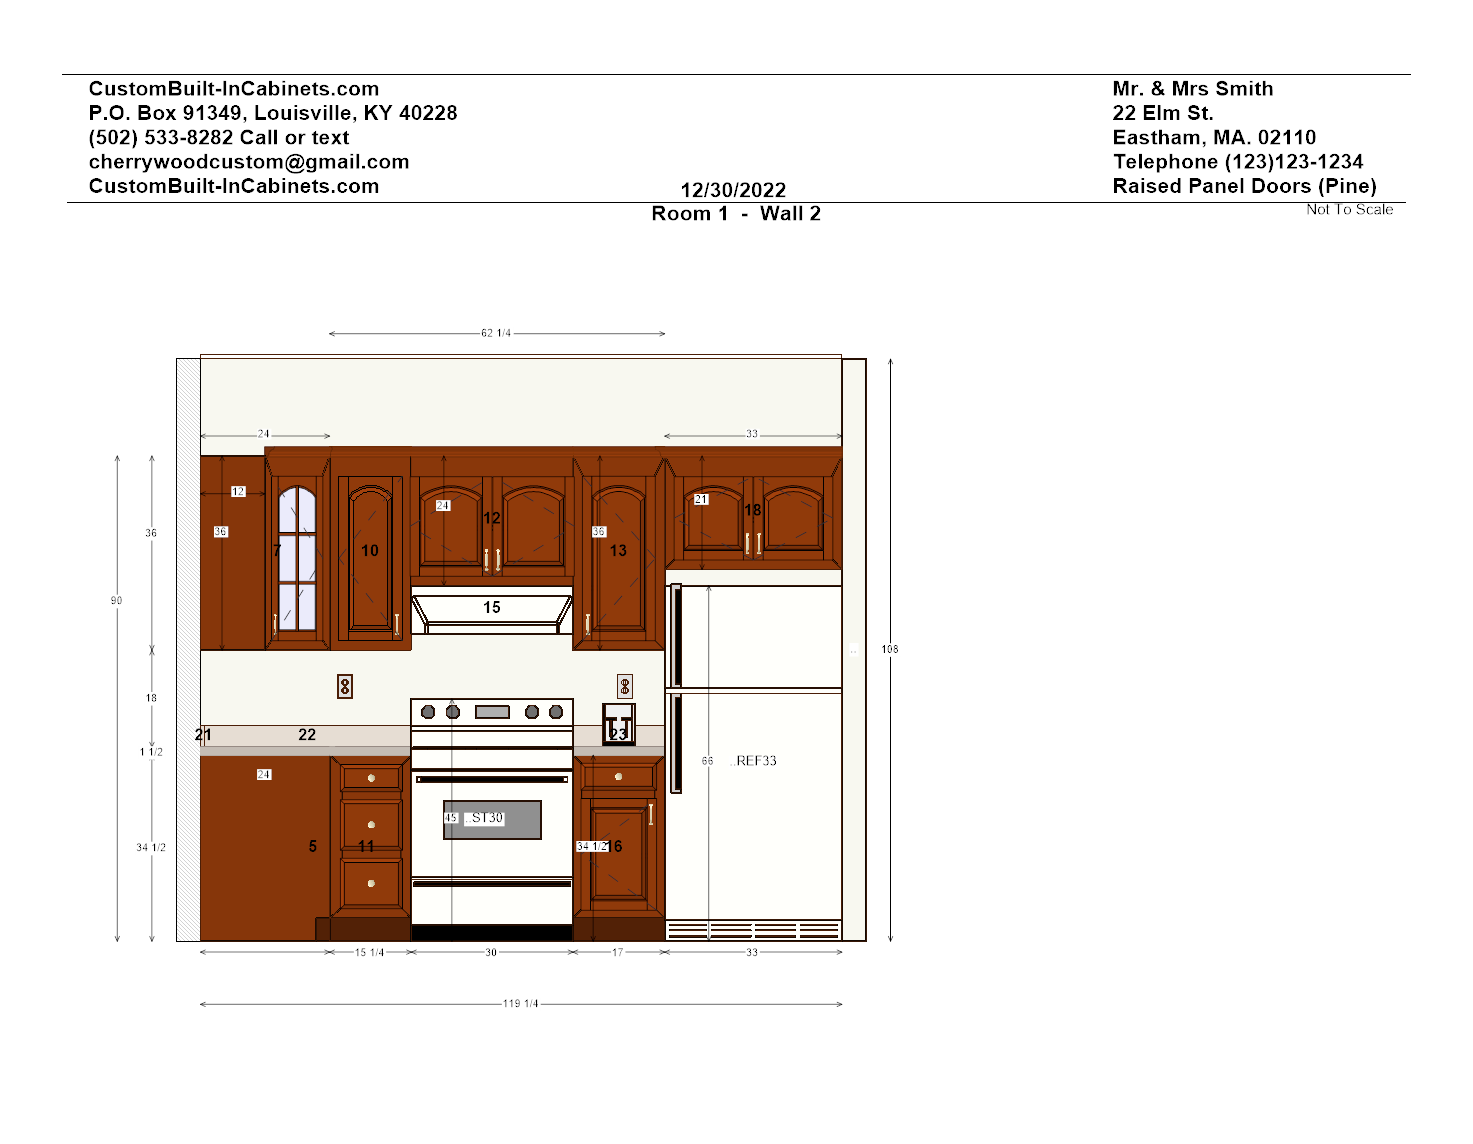 This is sketch 3 of 3 example images of a custom cabinetry project by Ryan Bruzan. This sketch is a front view digital sketch of a wall of kitchen cabinets on a cabinetry design project by Ryan Bruzan and Cherrywood Custom Woodworking.